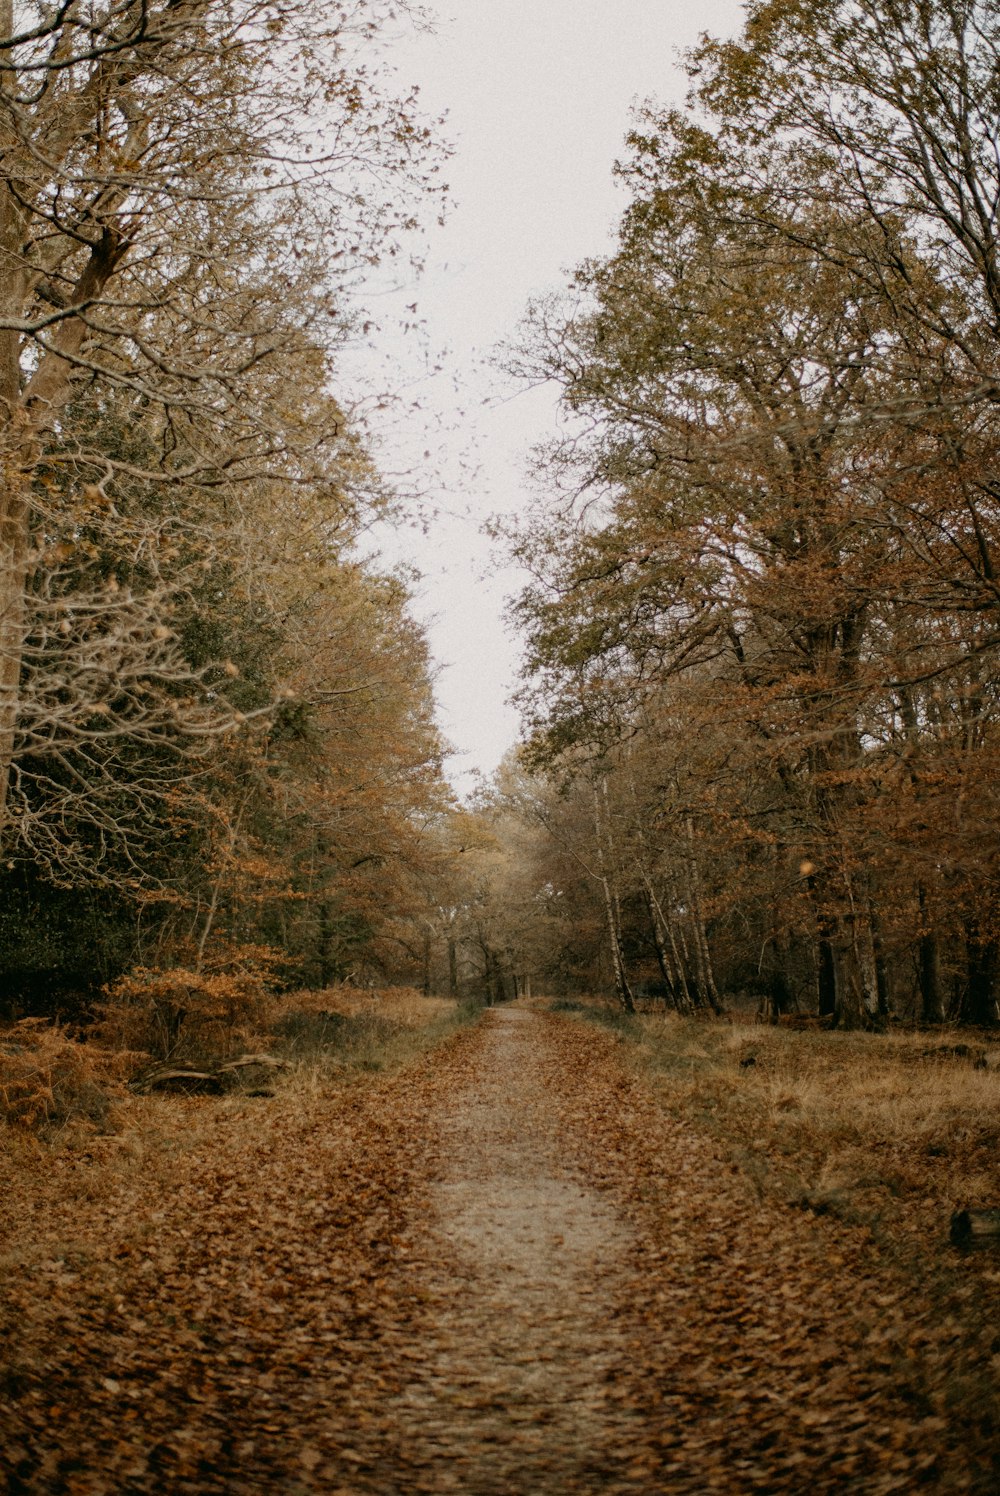 a dirt road surrounded by trees with leaves on the ground